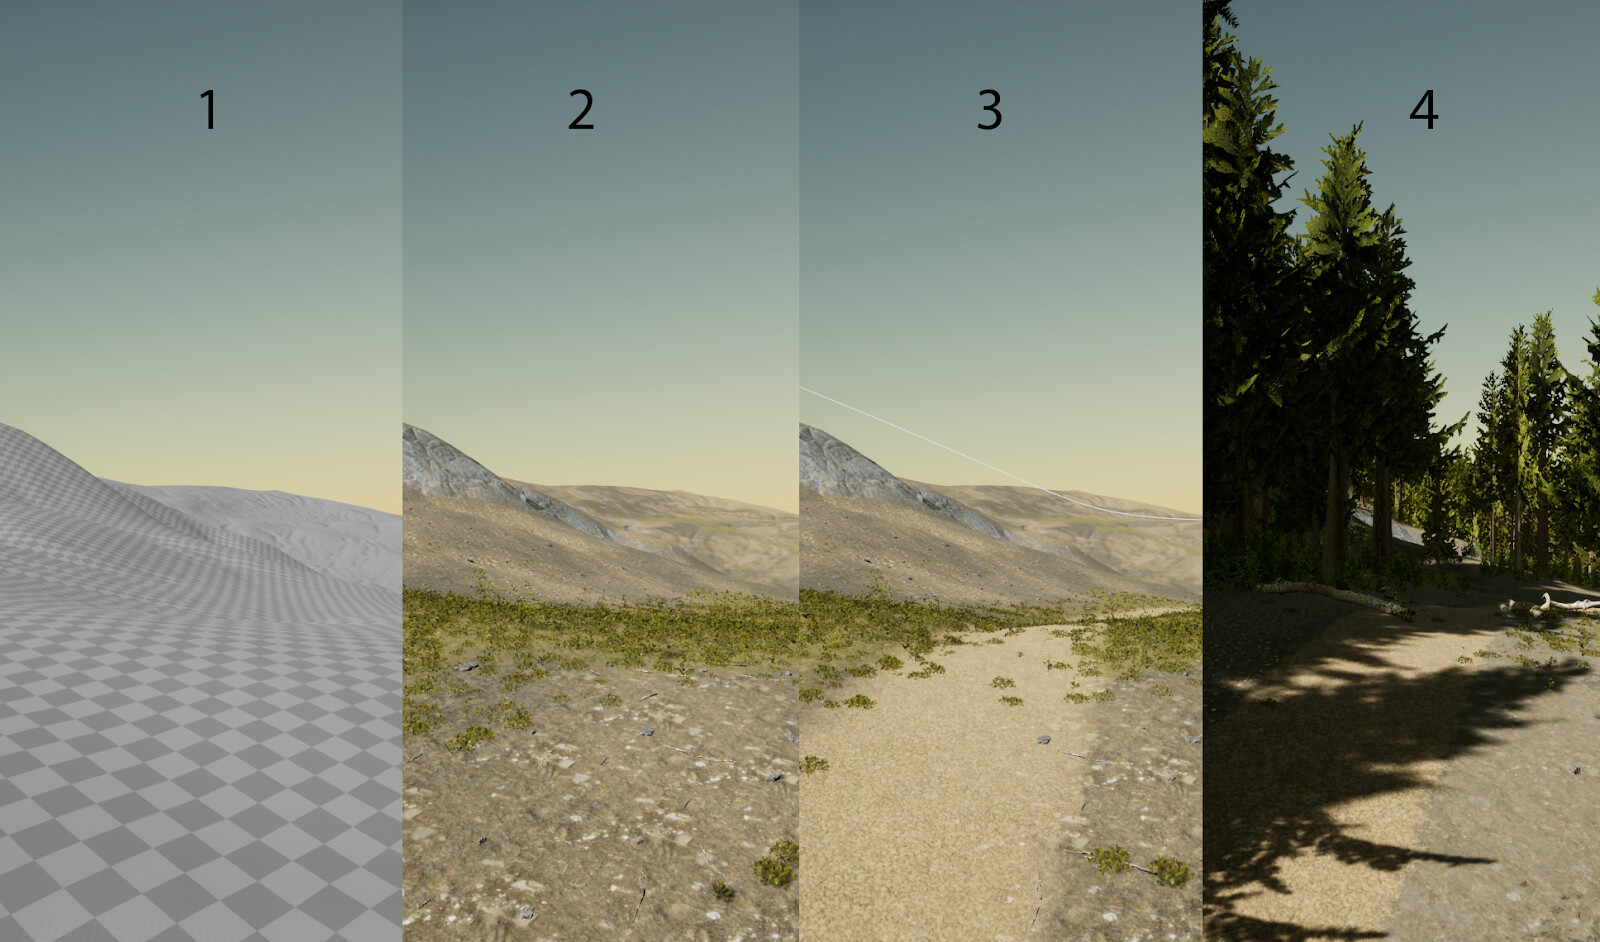 1. Terrain Generation
2. Landscape material with UE4 Grasstype for small plants
3. Road tool, masks out forest footprint
4. Tree placement